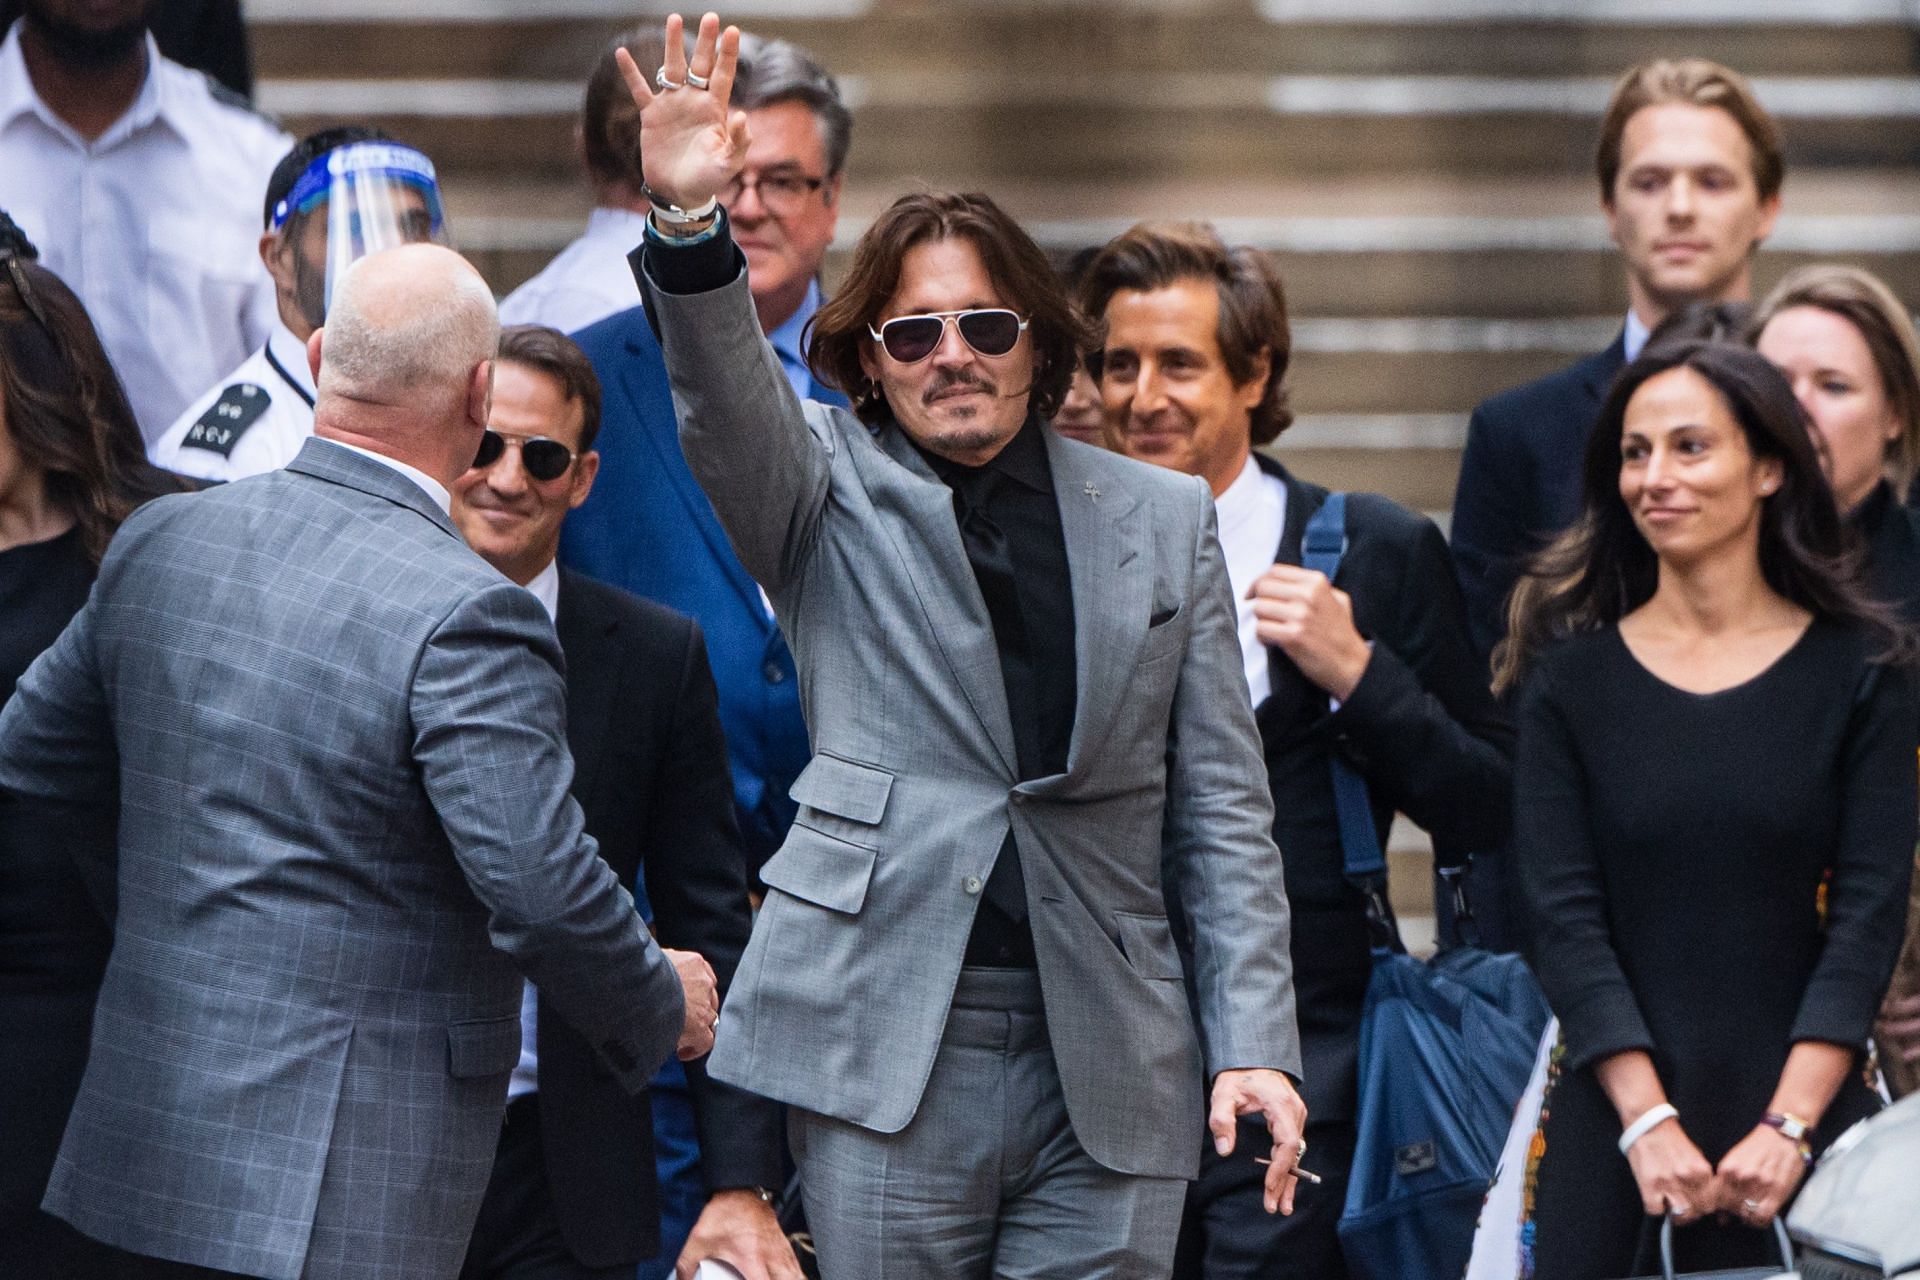 CUNY removes article praising attorney who worked with Johnny Depp (Image via Getty Images)